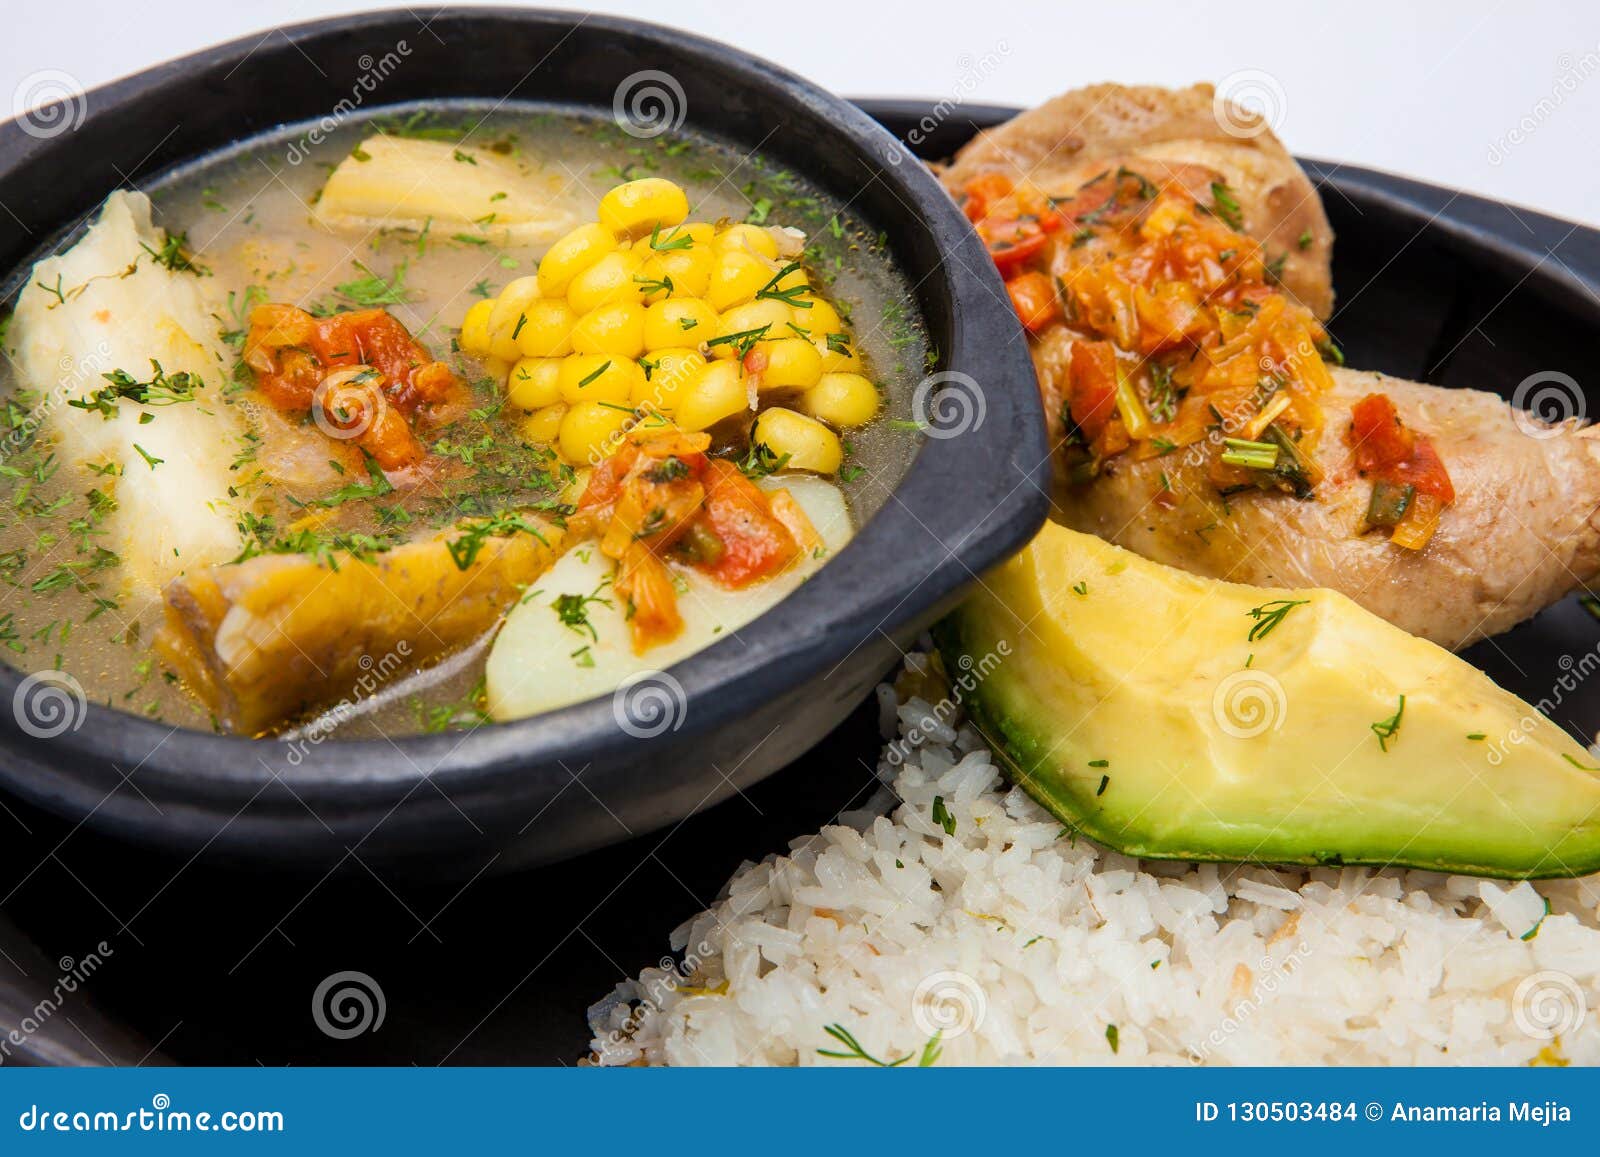 traditional colombian soup from the region of valle del cauca called sancocho